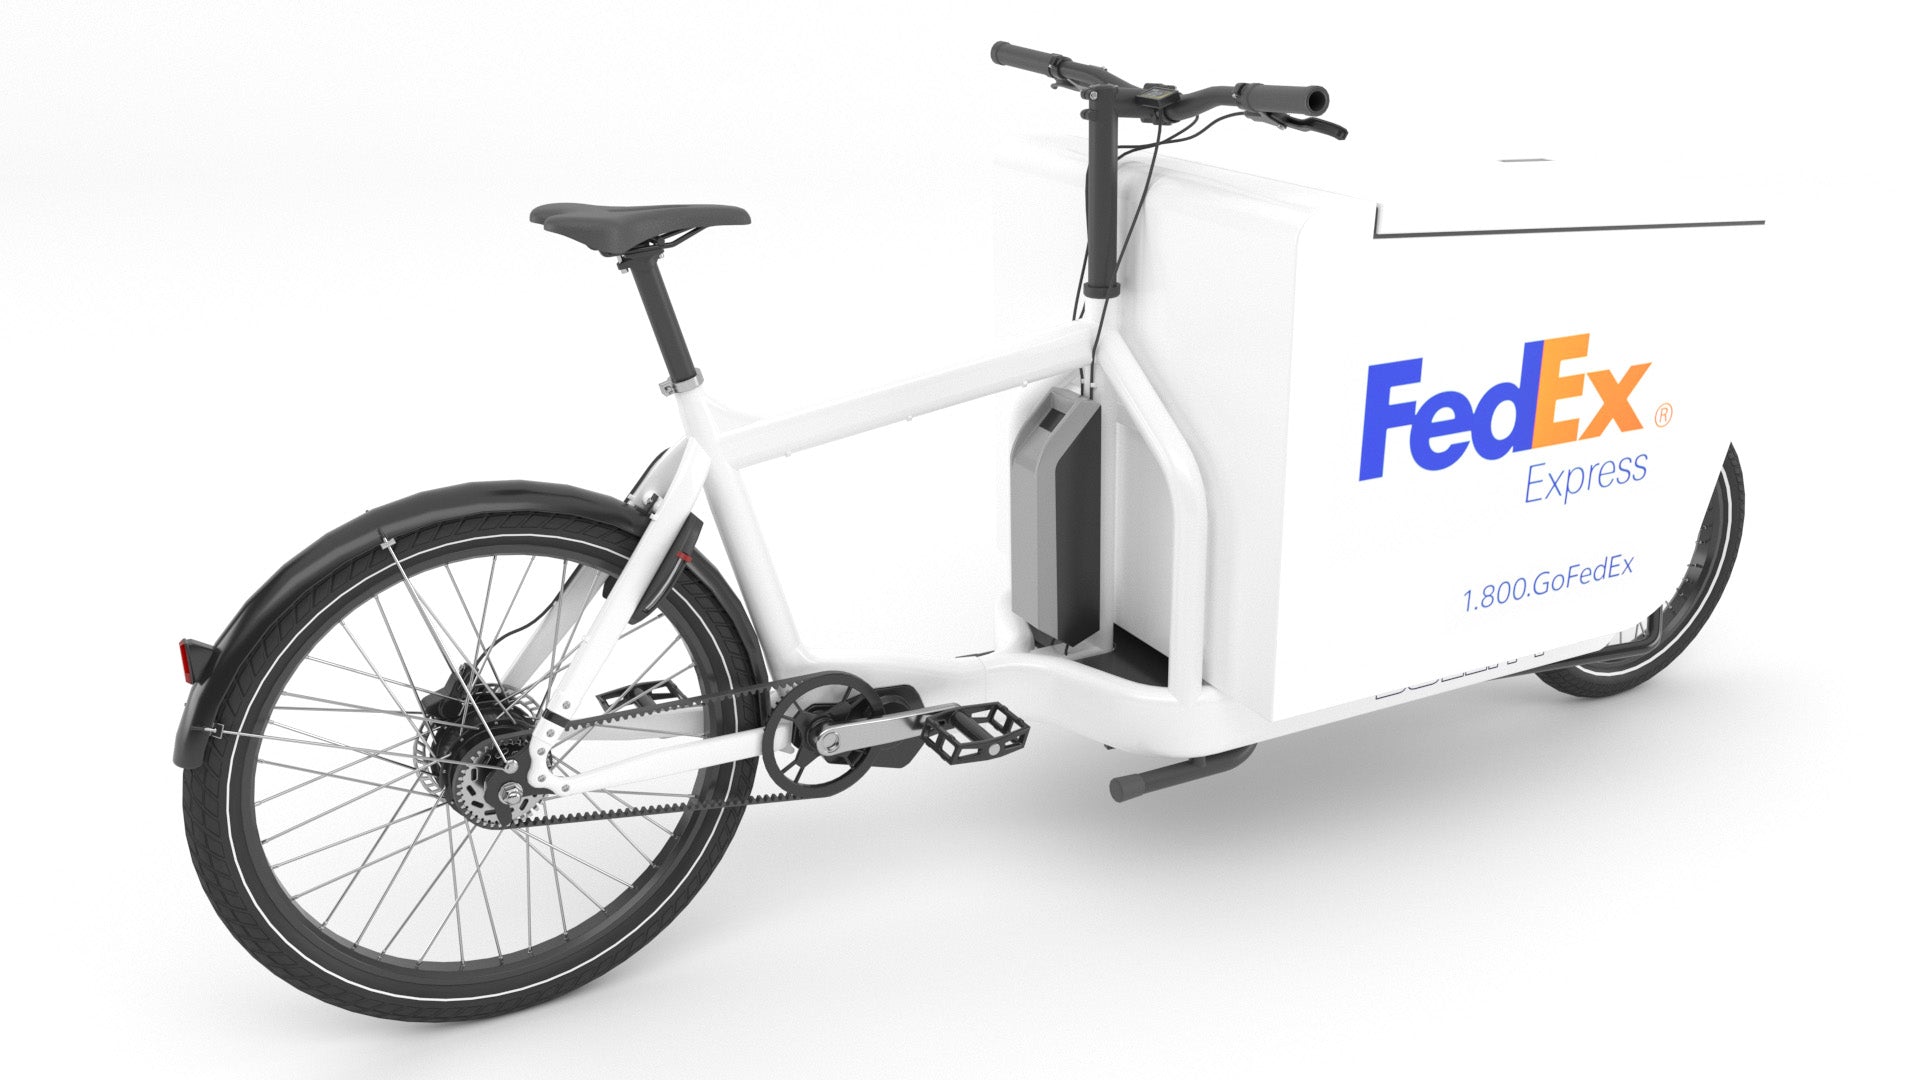 Fexex delivery bike 3D model